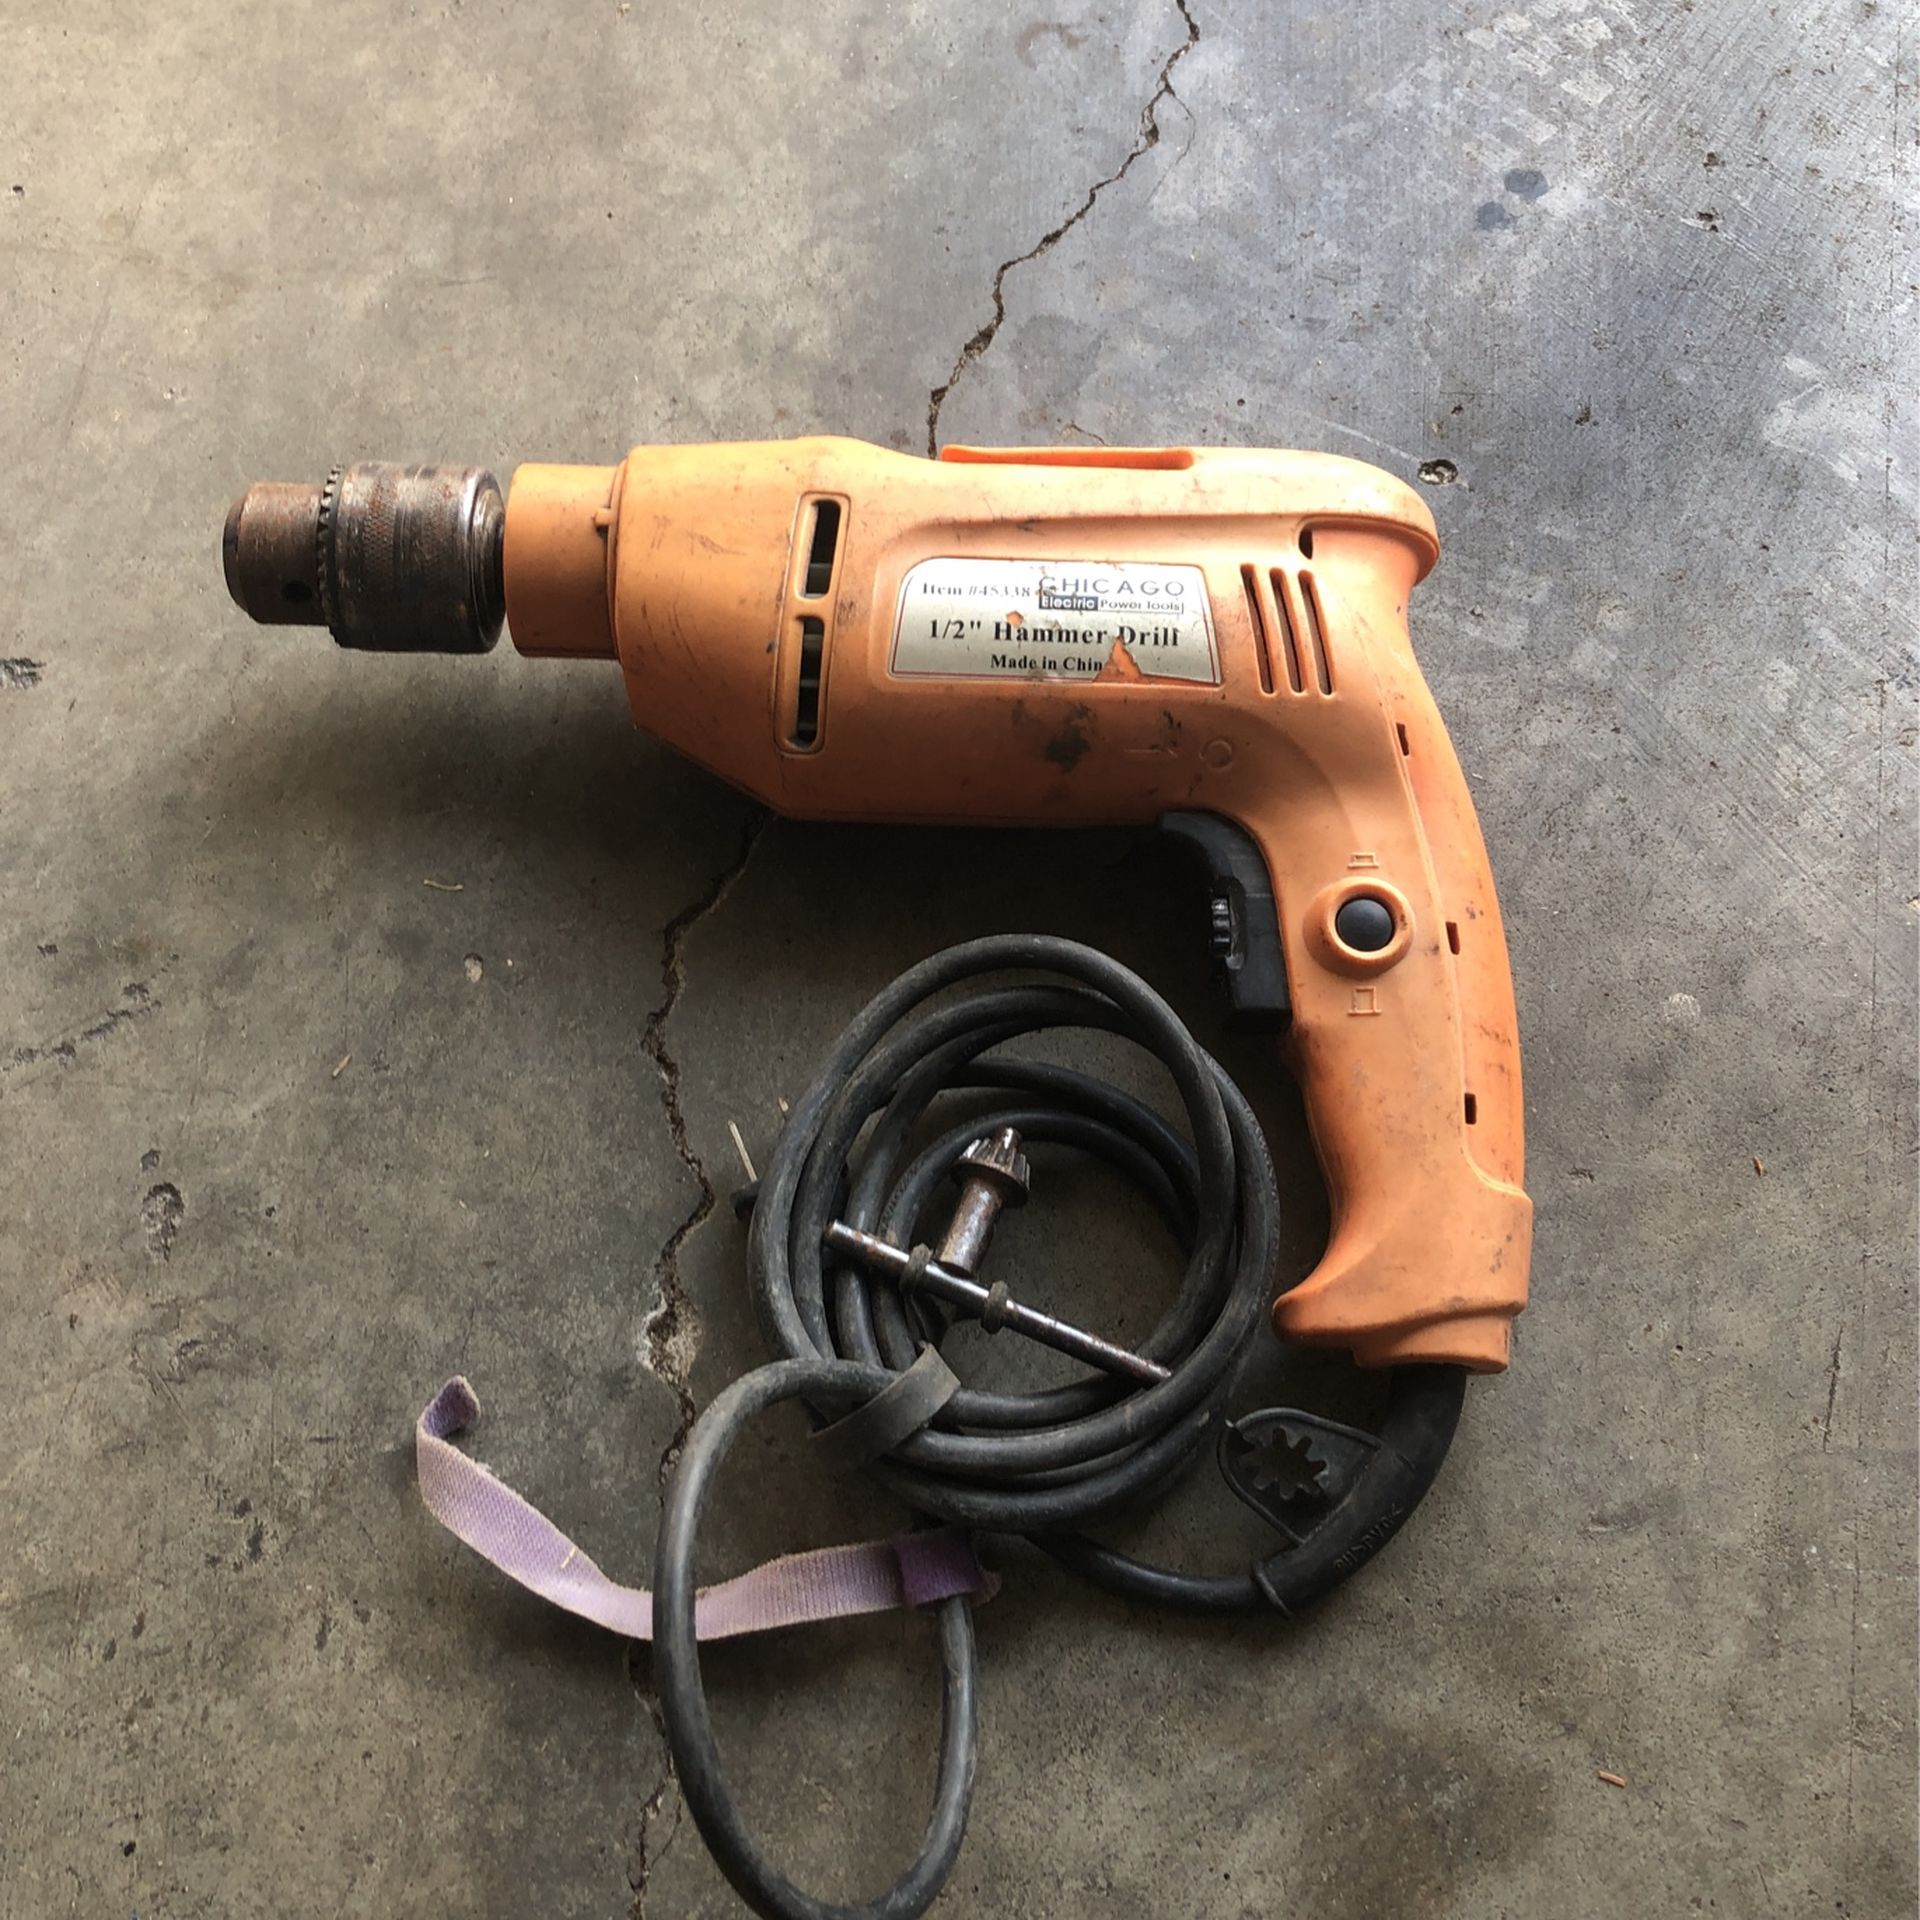 1/2” Hammer Drill In Good Condition 